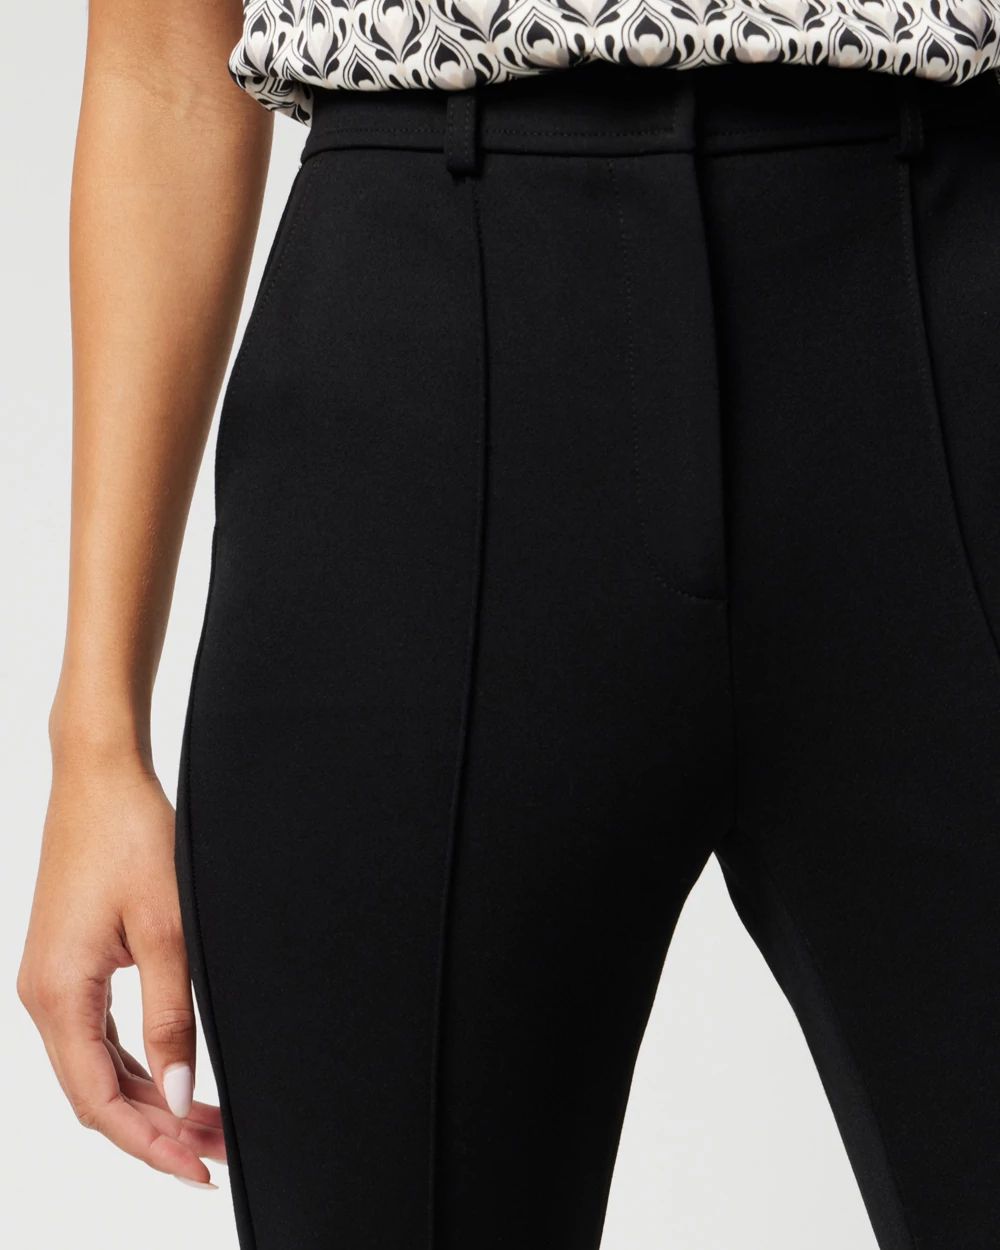 Extra High-Rise Luxe Stretch Bootcut Pants